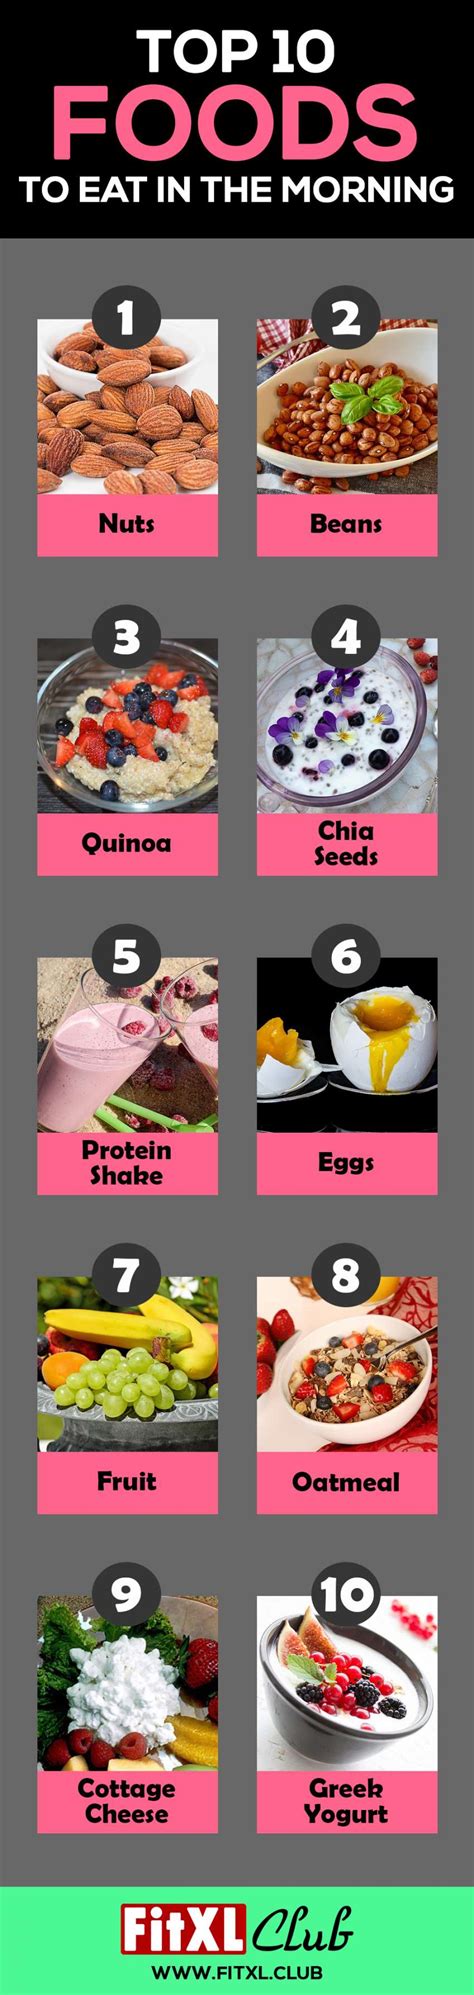 Top 10 Foods To Eat In The Morning Infographic Fitxl